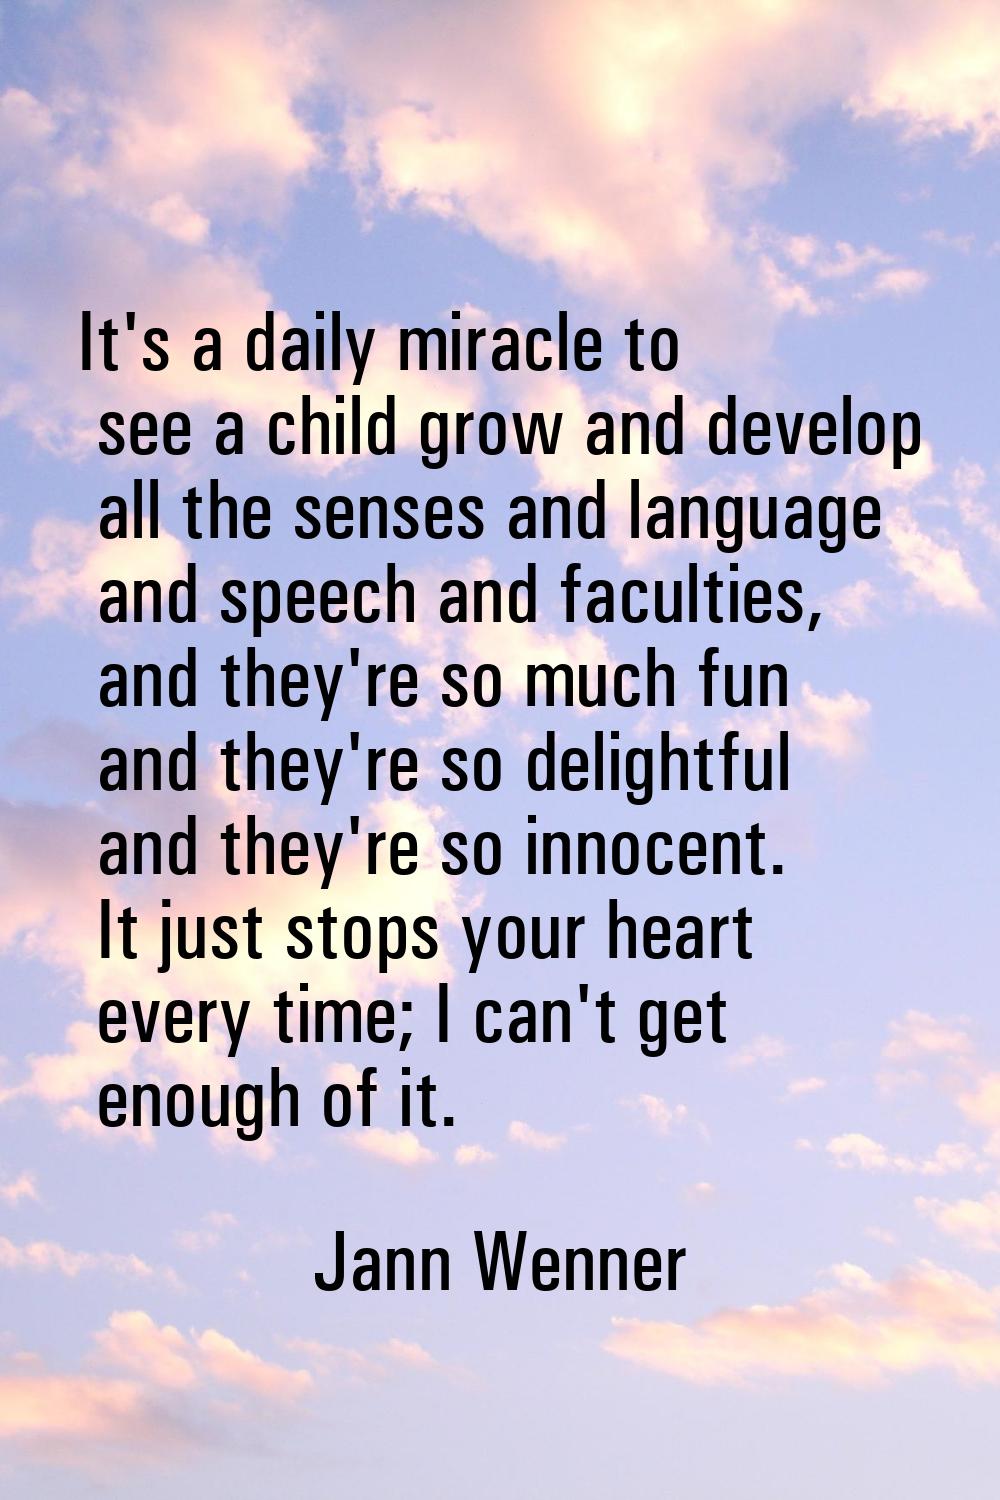 It's a daily miracle to see a child grow and develop all the senses and language and speech and fac